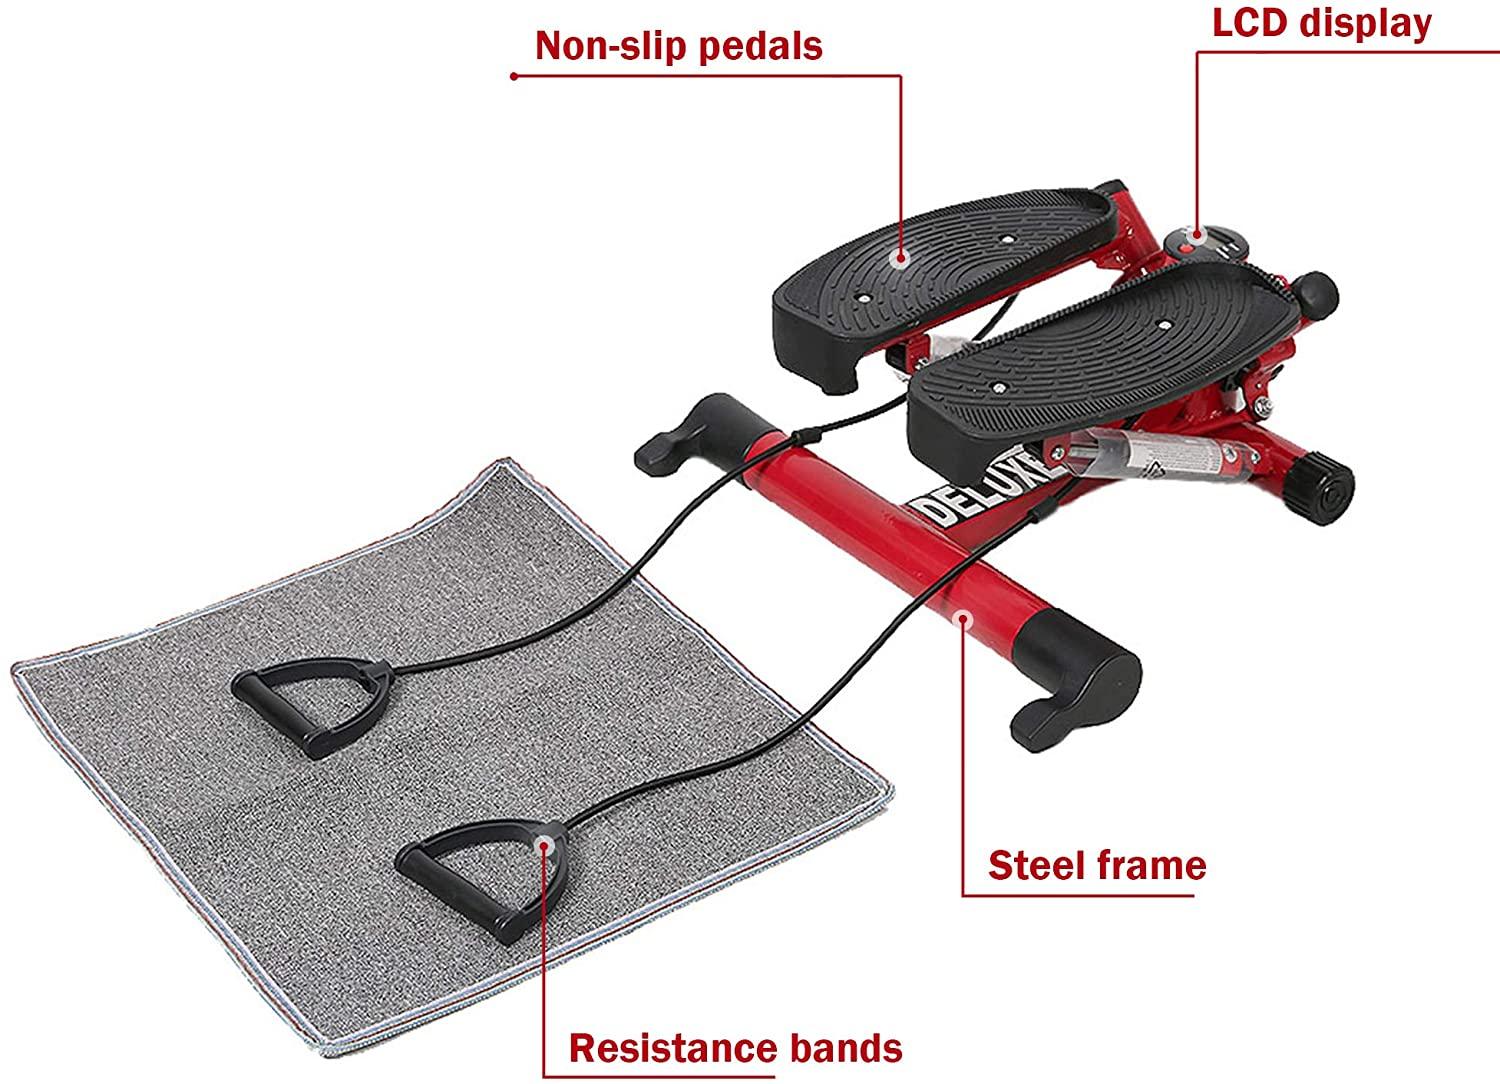 Folding Fitness Step Machine Air Walk Trainer Exercise Stepper Glider with LCD Display for Home, Office and Gym - Bosonshop